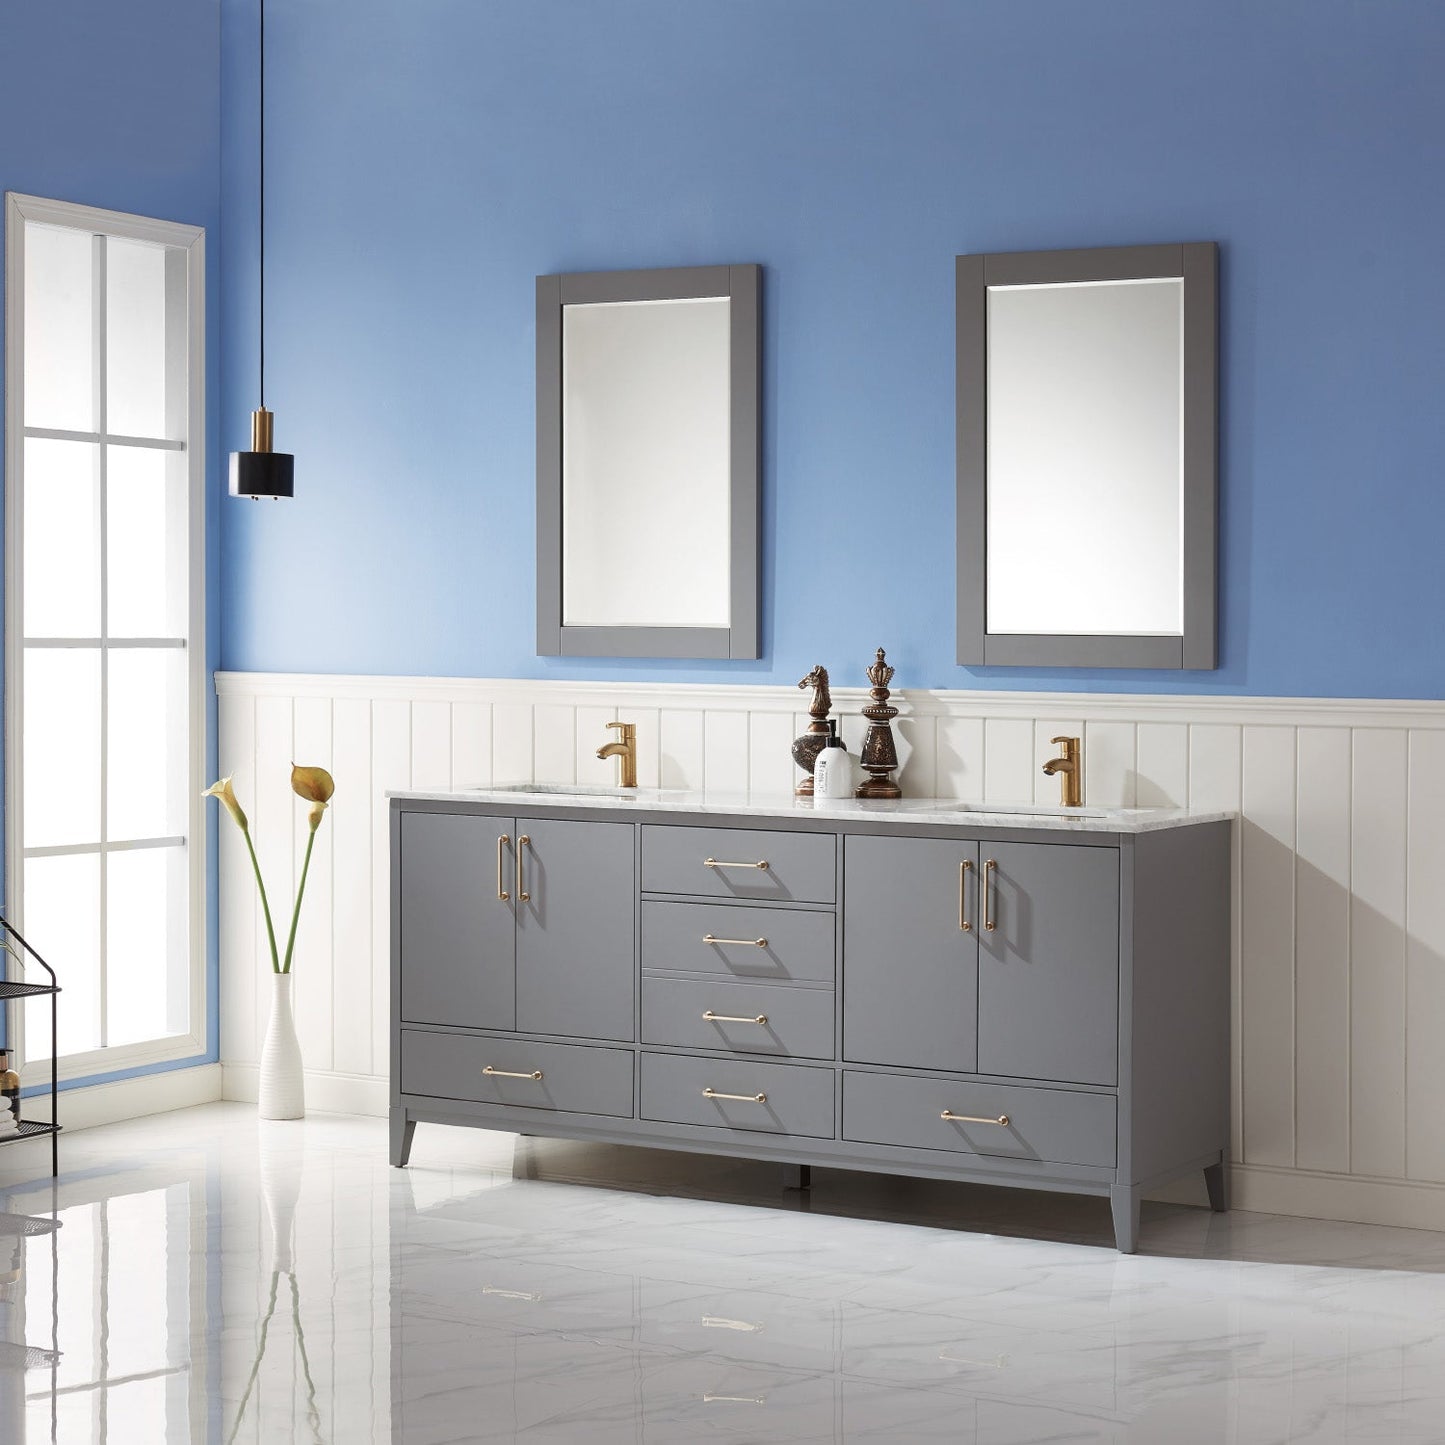 Sutton 72" Double Bathroom Vanity Set in Gray and Carrara White Marble Countertop with Mirror